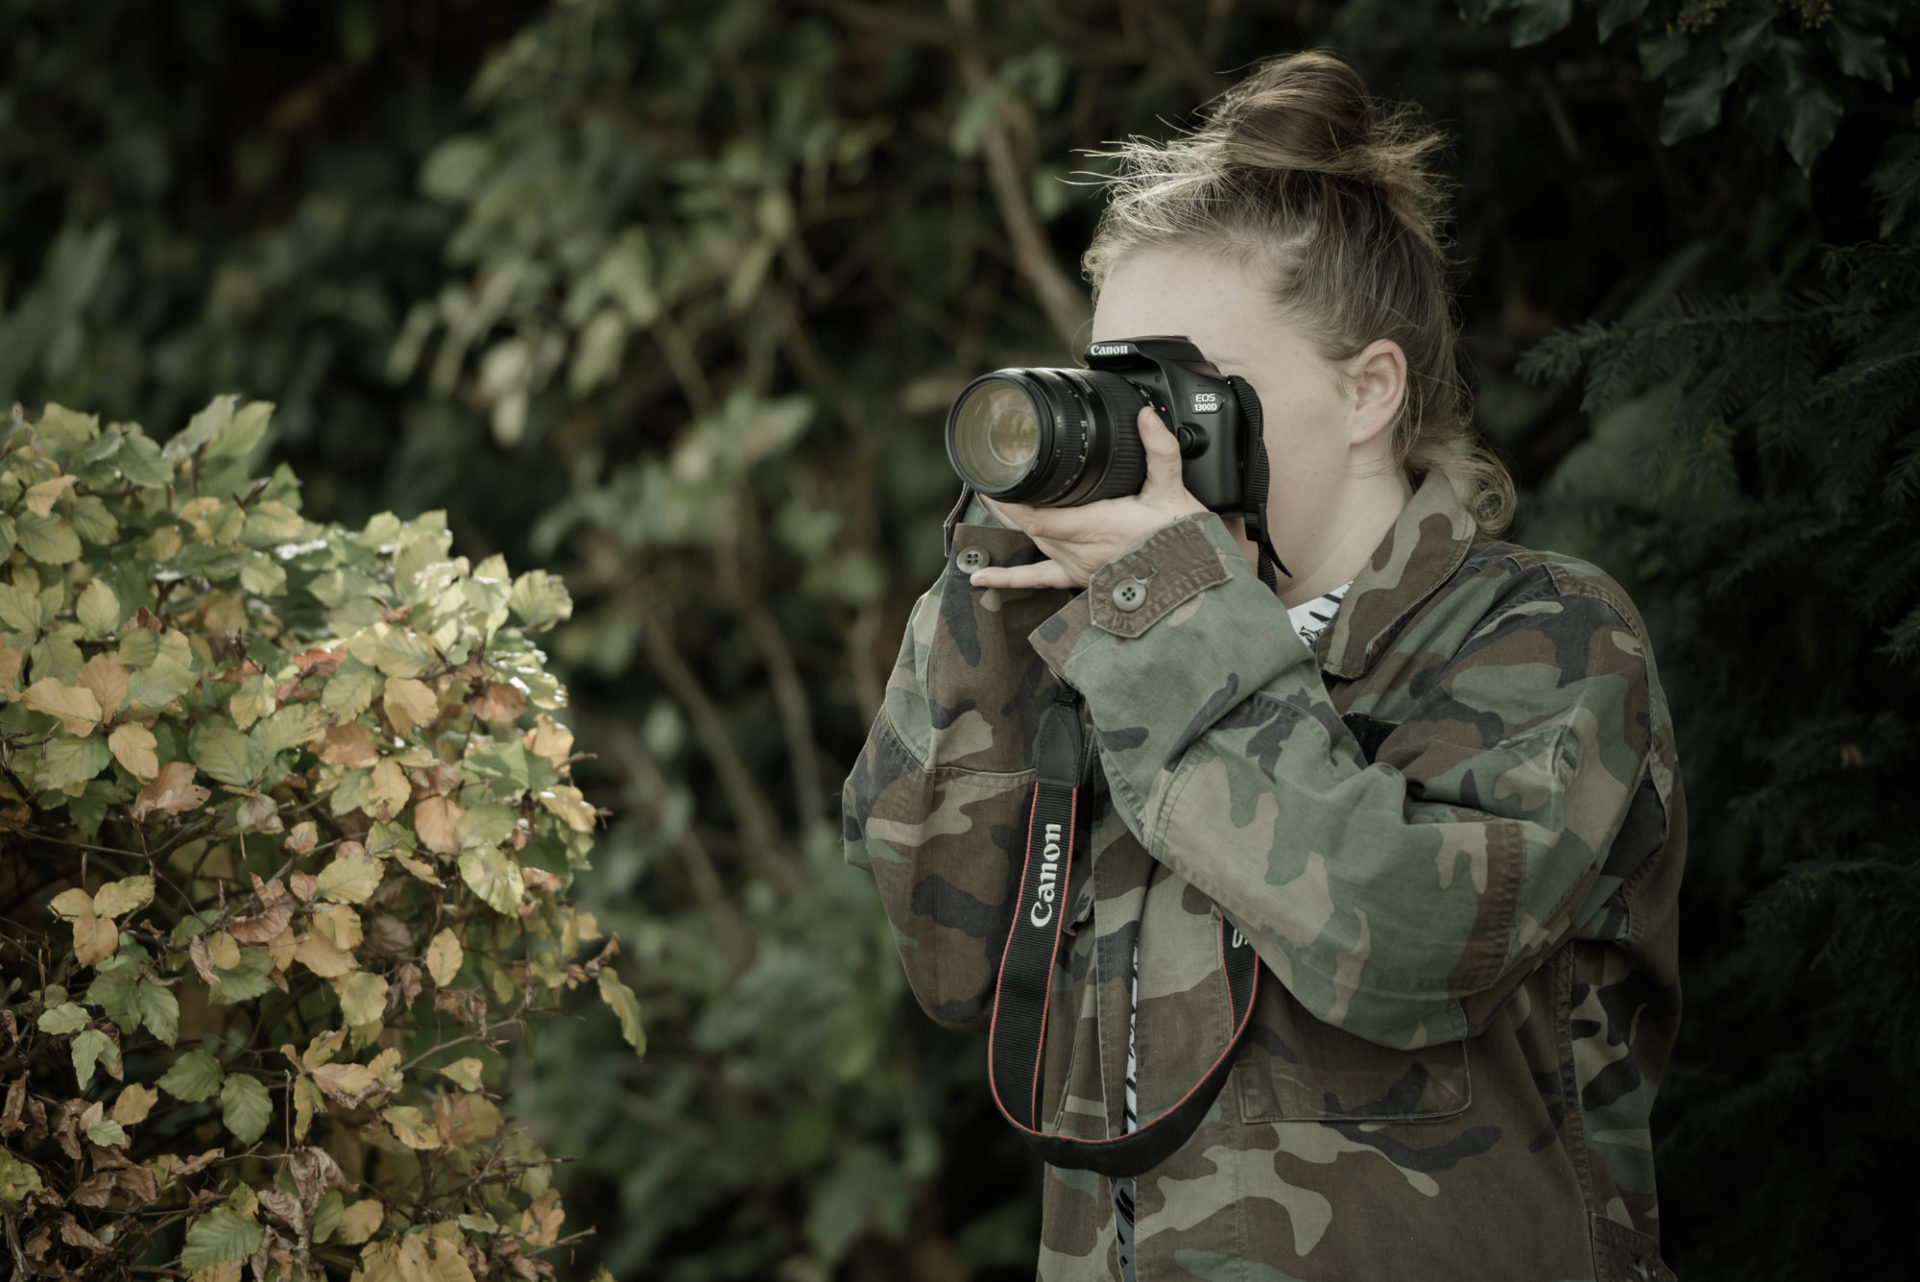 photography workshops near Abingdon gift vouchers available